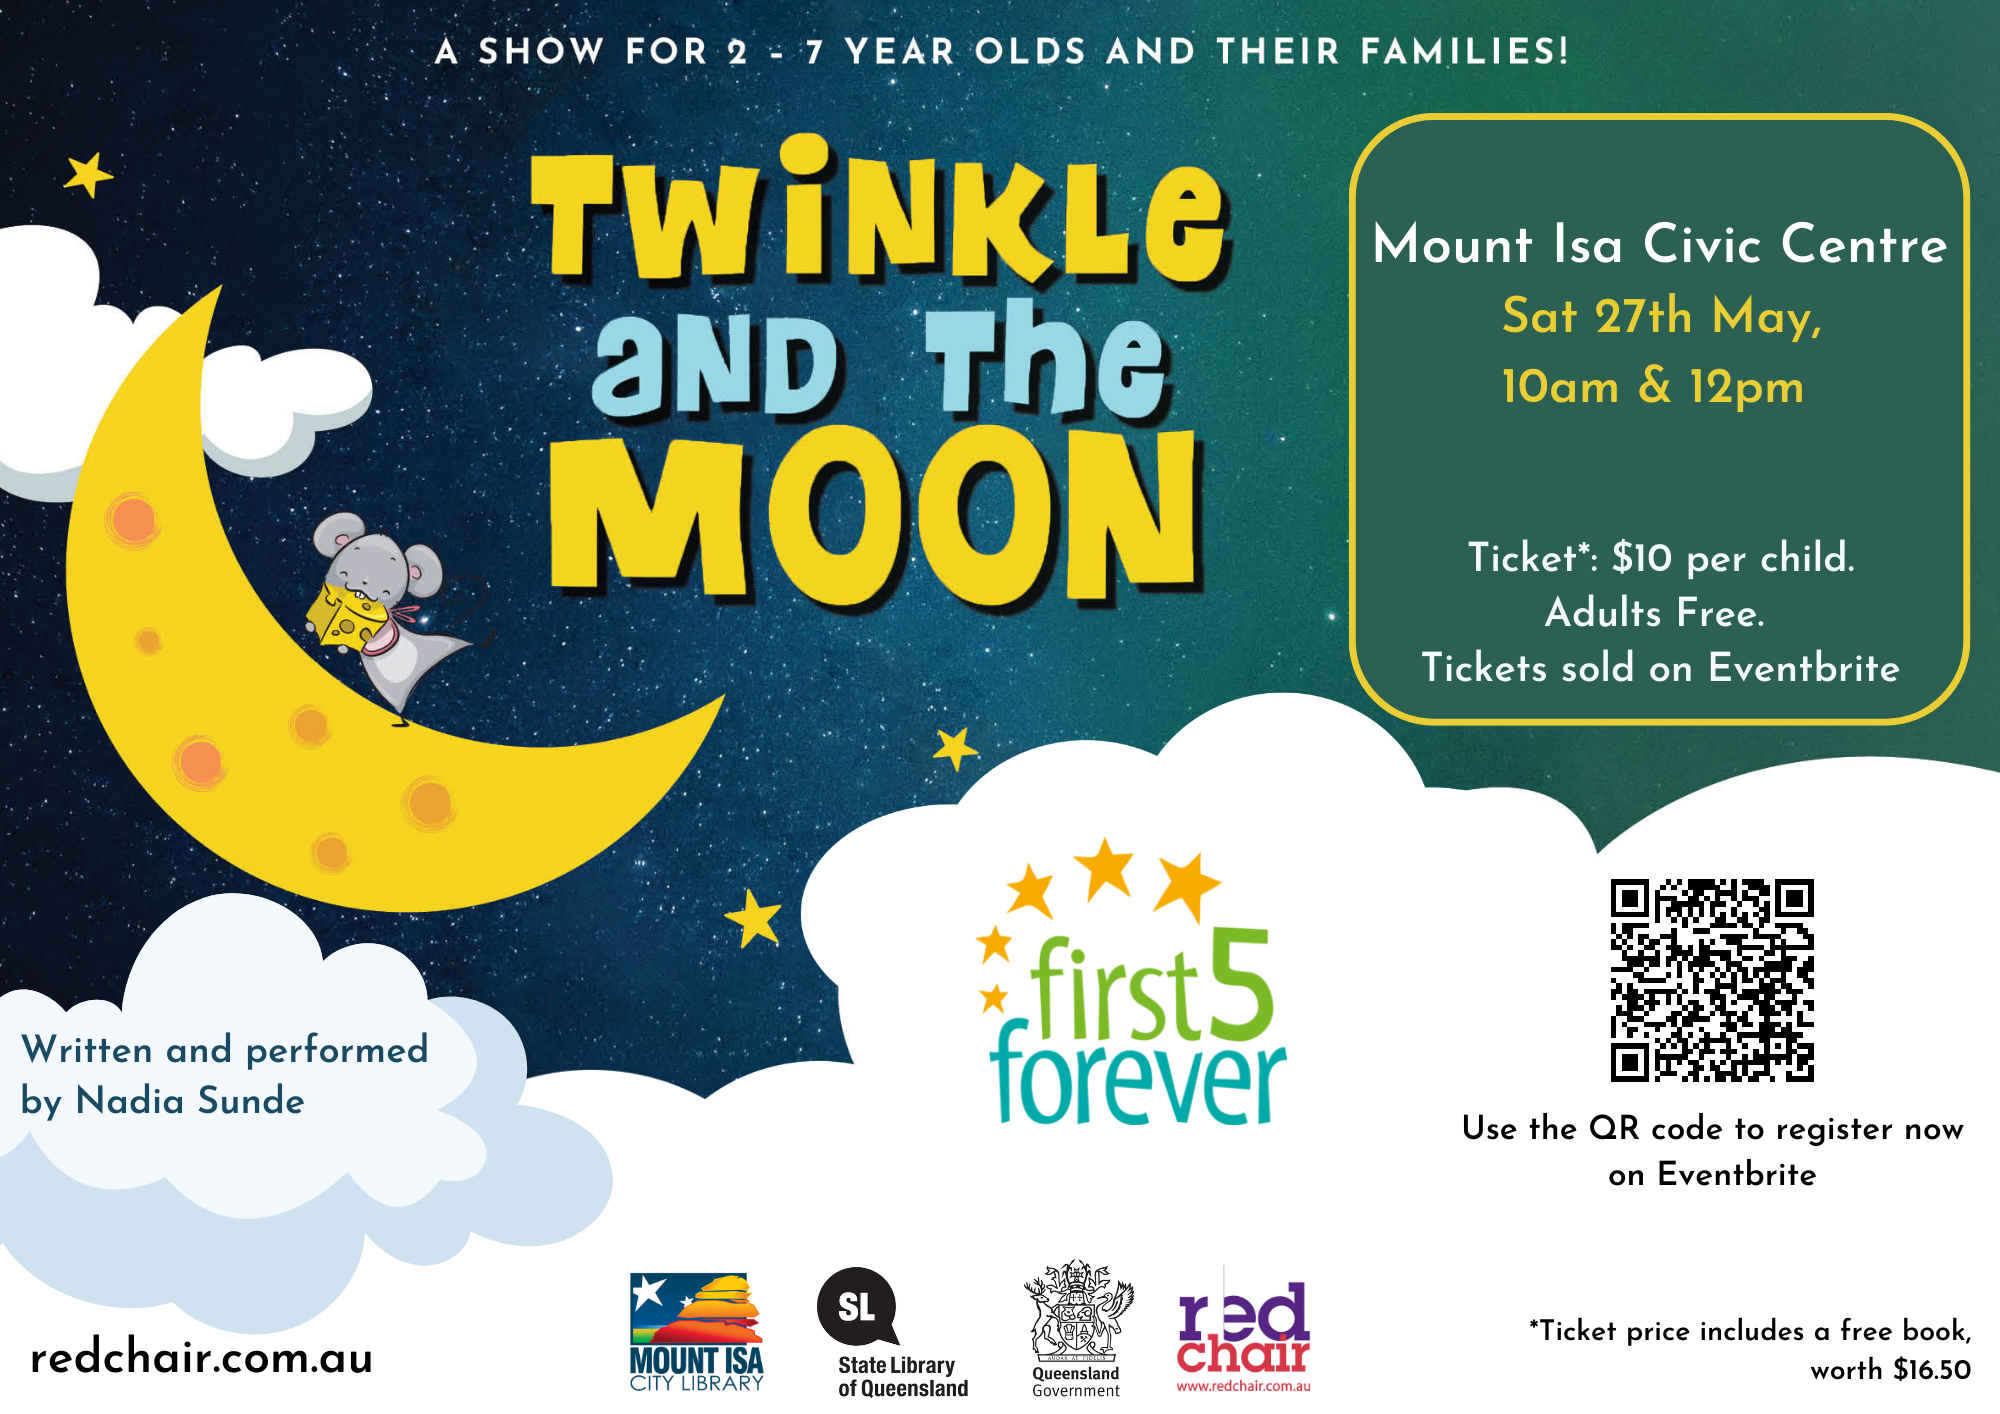 Twinkle and the Moon